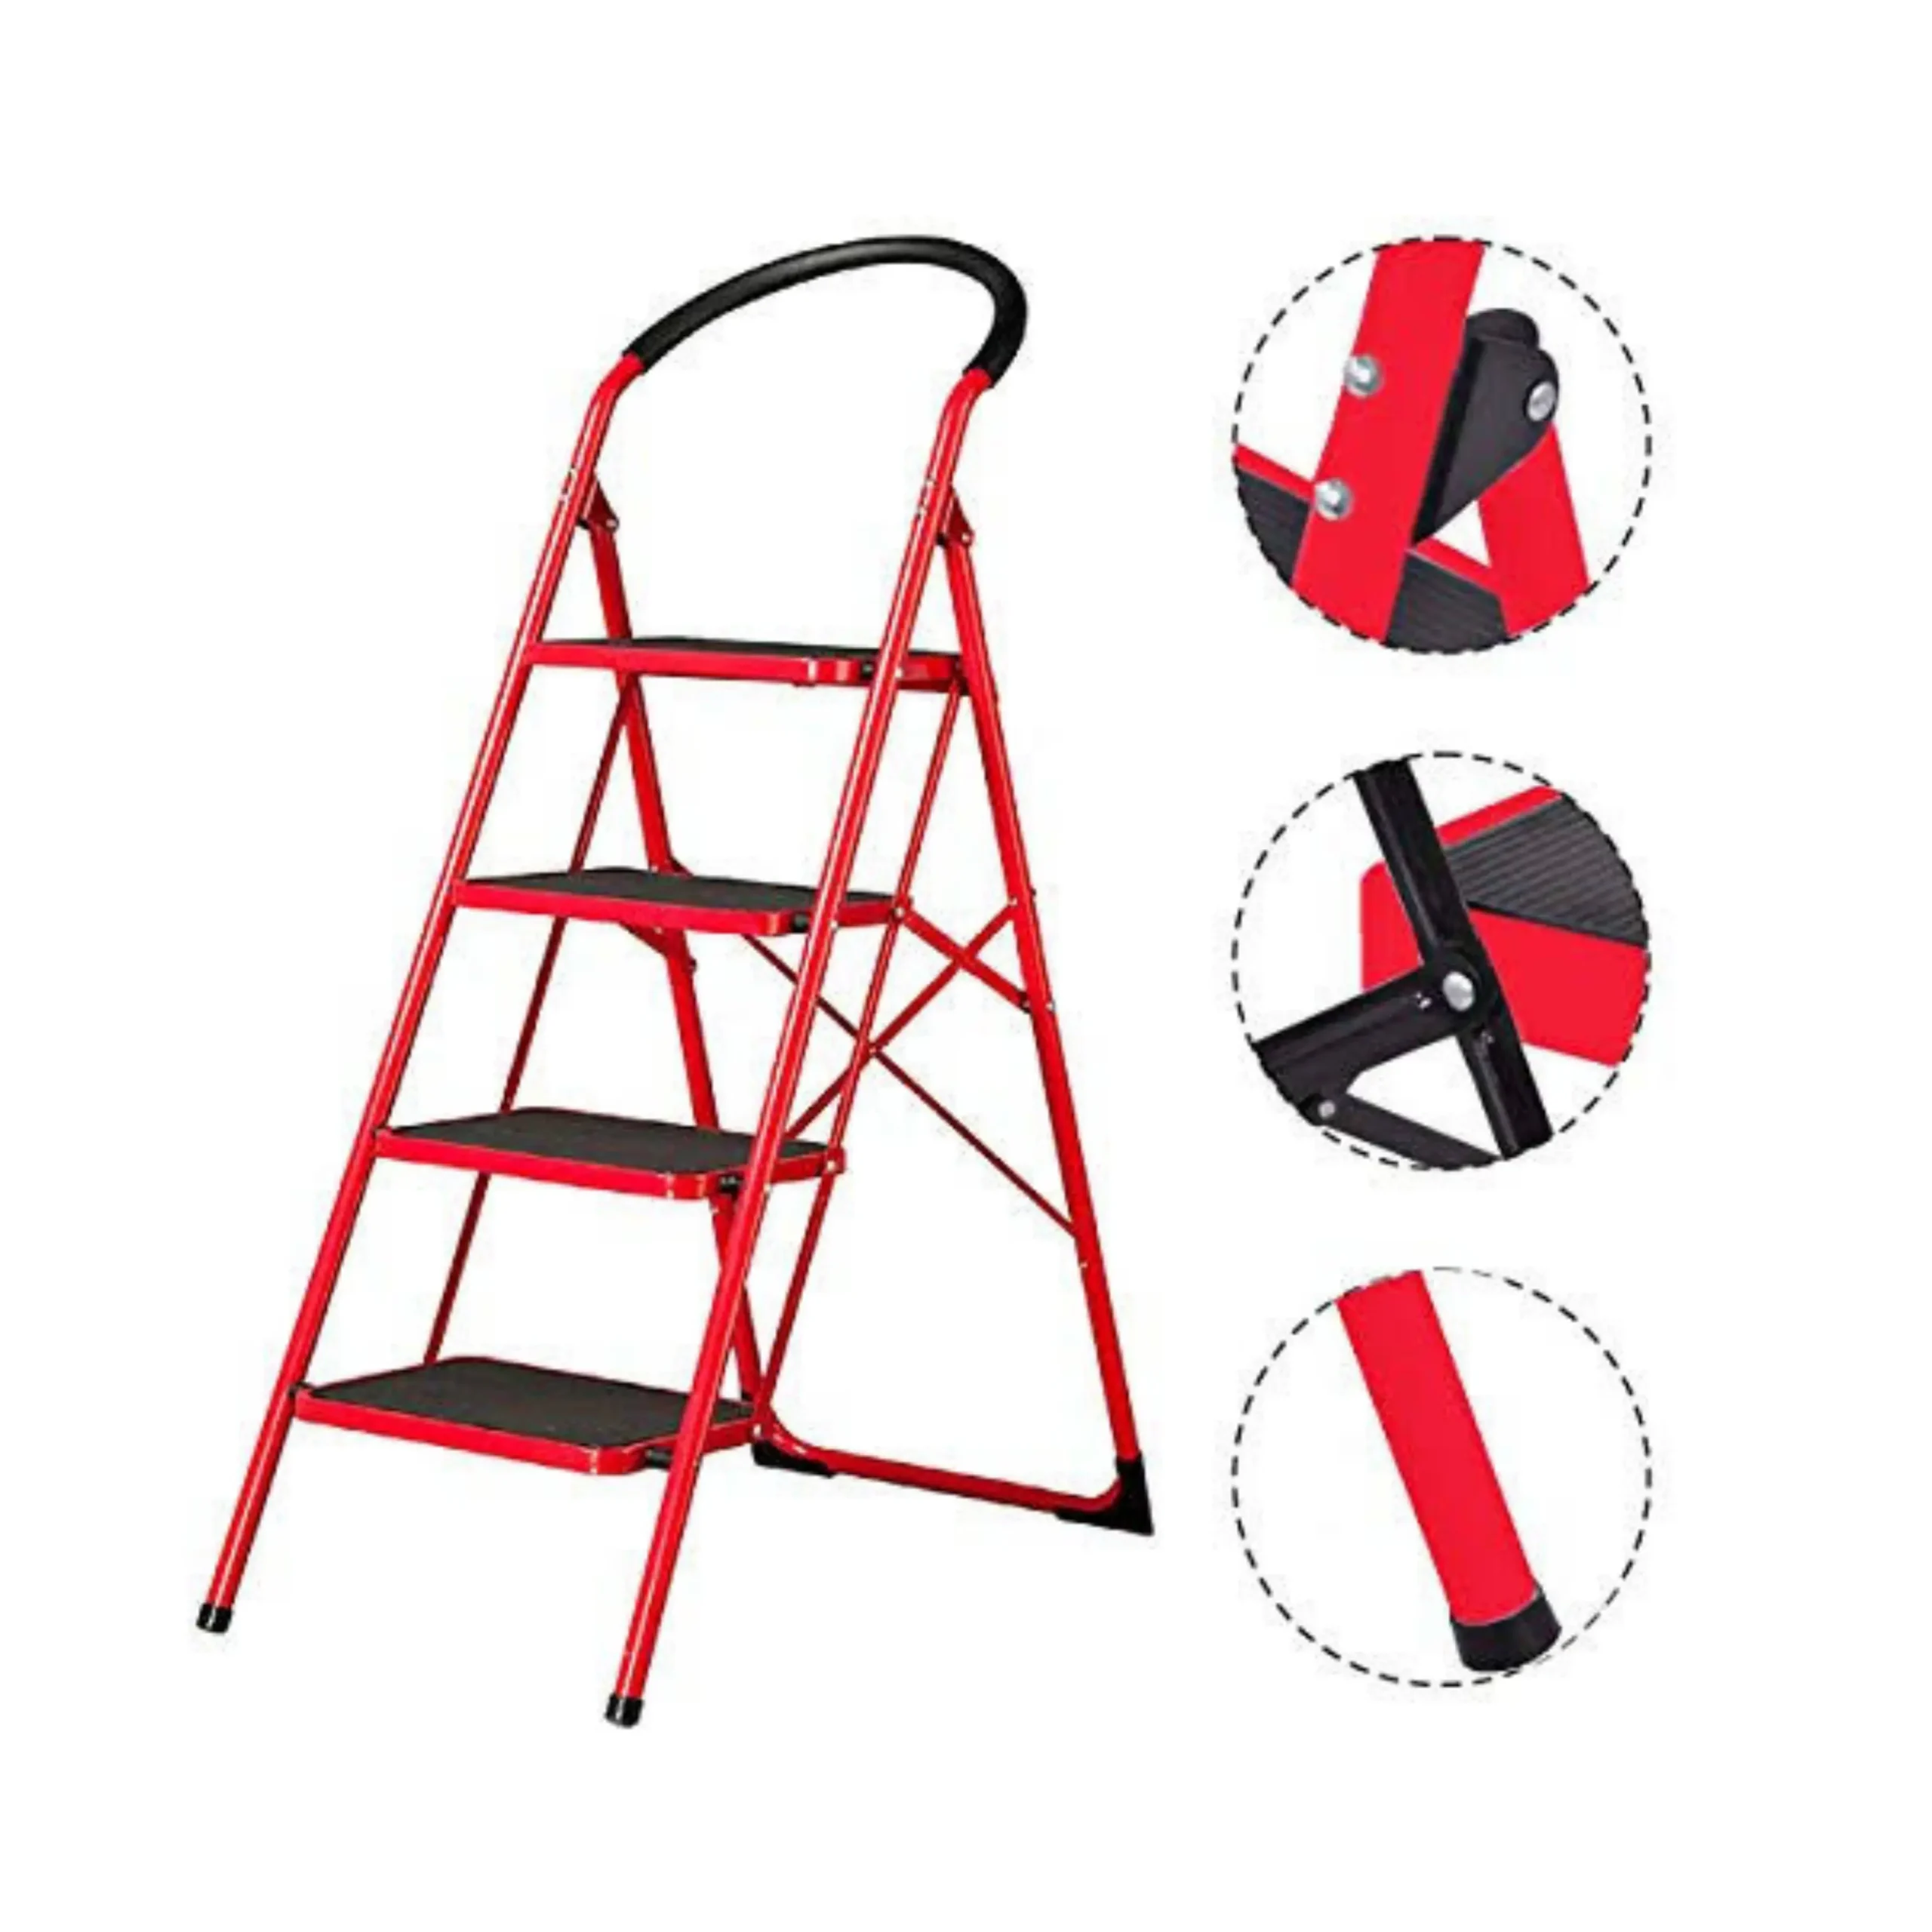 4 LAYER MULTIFUNCTION HOUSEHOLD LADDER, FOLDABLE LADDER WITH SAFETY HOLD HANDLE, STURDY AND DURABLE LADDER